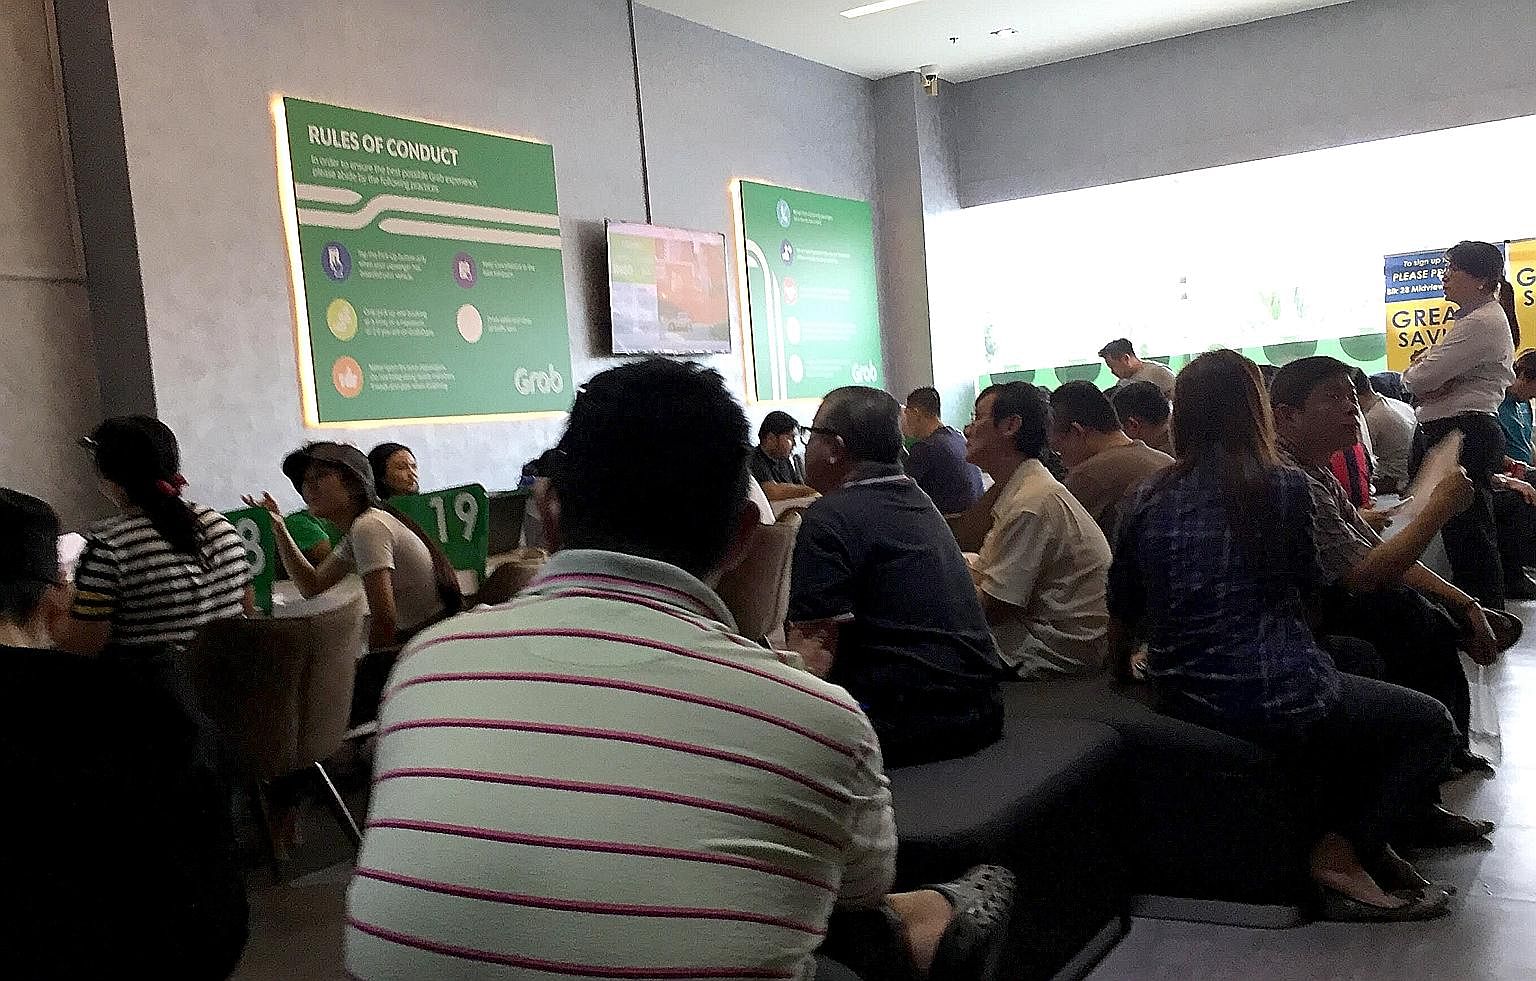 Grab's office in Sin Ming Lane was packed yesterday afternoon with many Comfort and CityCab drivers. At about 2.50pm, the queue number was 473.